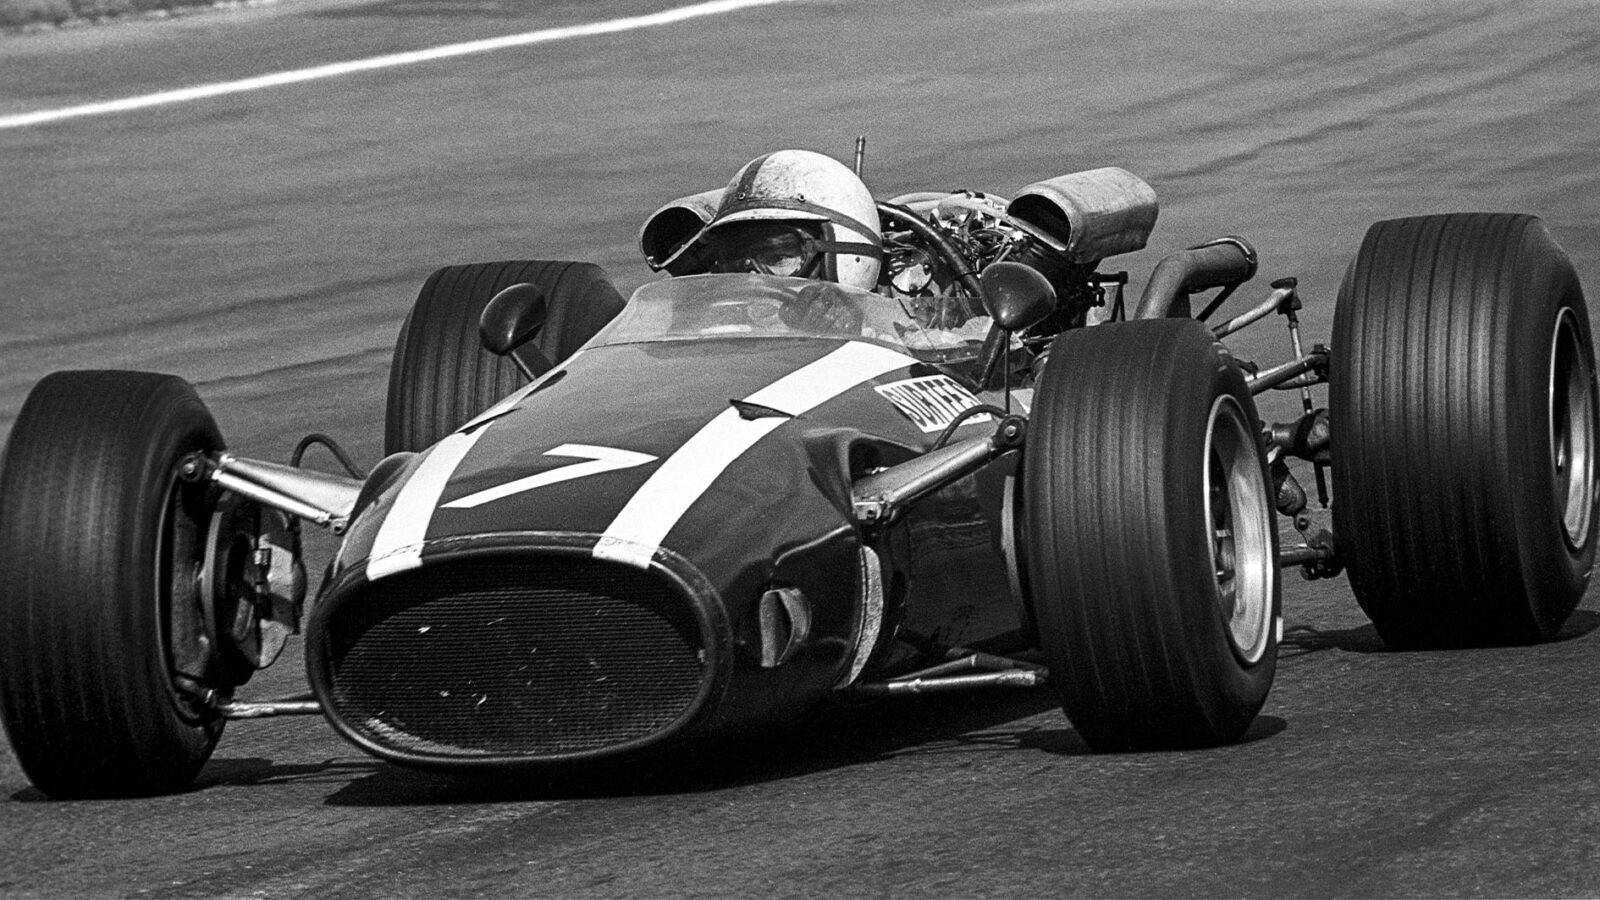 2 John Surtees, Cooper-Maserati T81, Grand Prix of Italy Monza 1966. (Photo by Bernard Cahier:Getty Images)